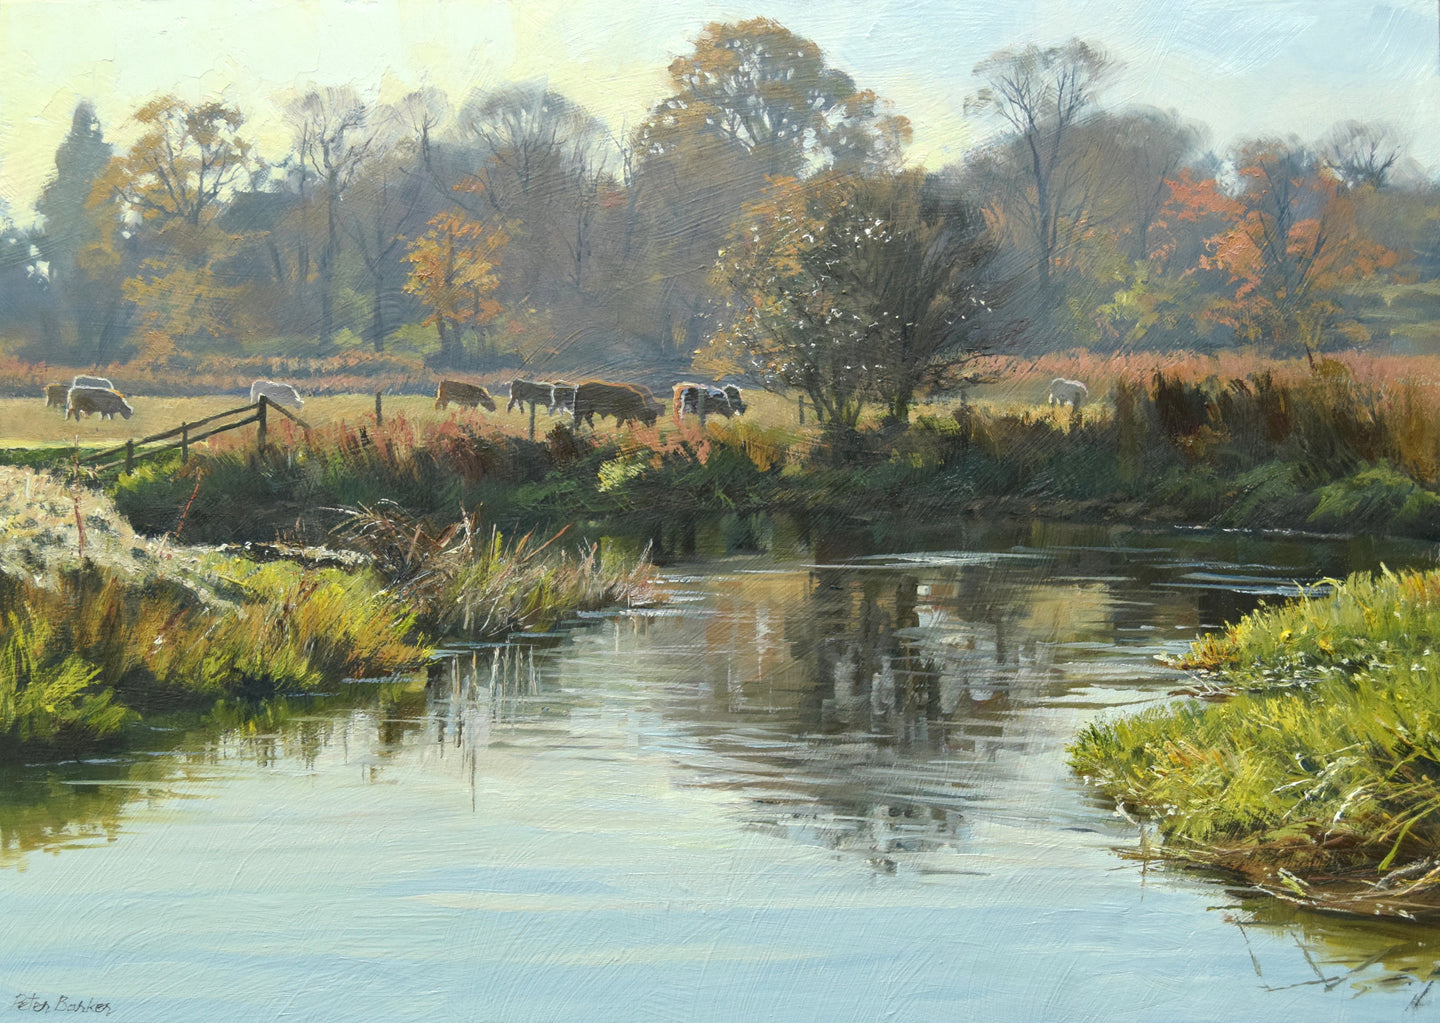 12 x 17 inch oil painting of cattle grazing in meadows at Water Newton, above a bend in the river Nene, Autumn trees reflected in the water